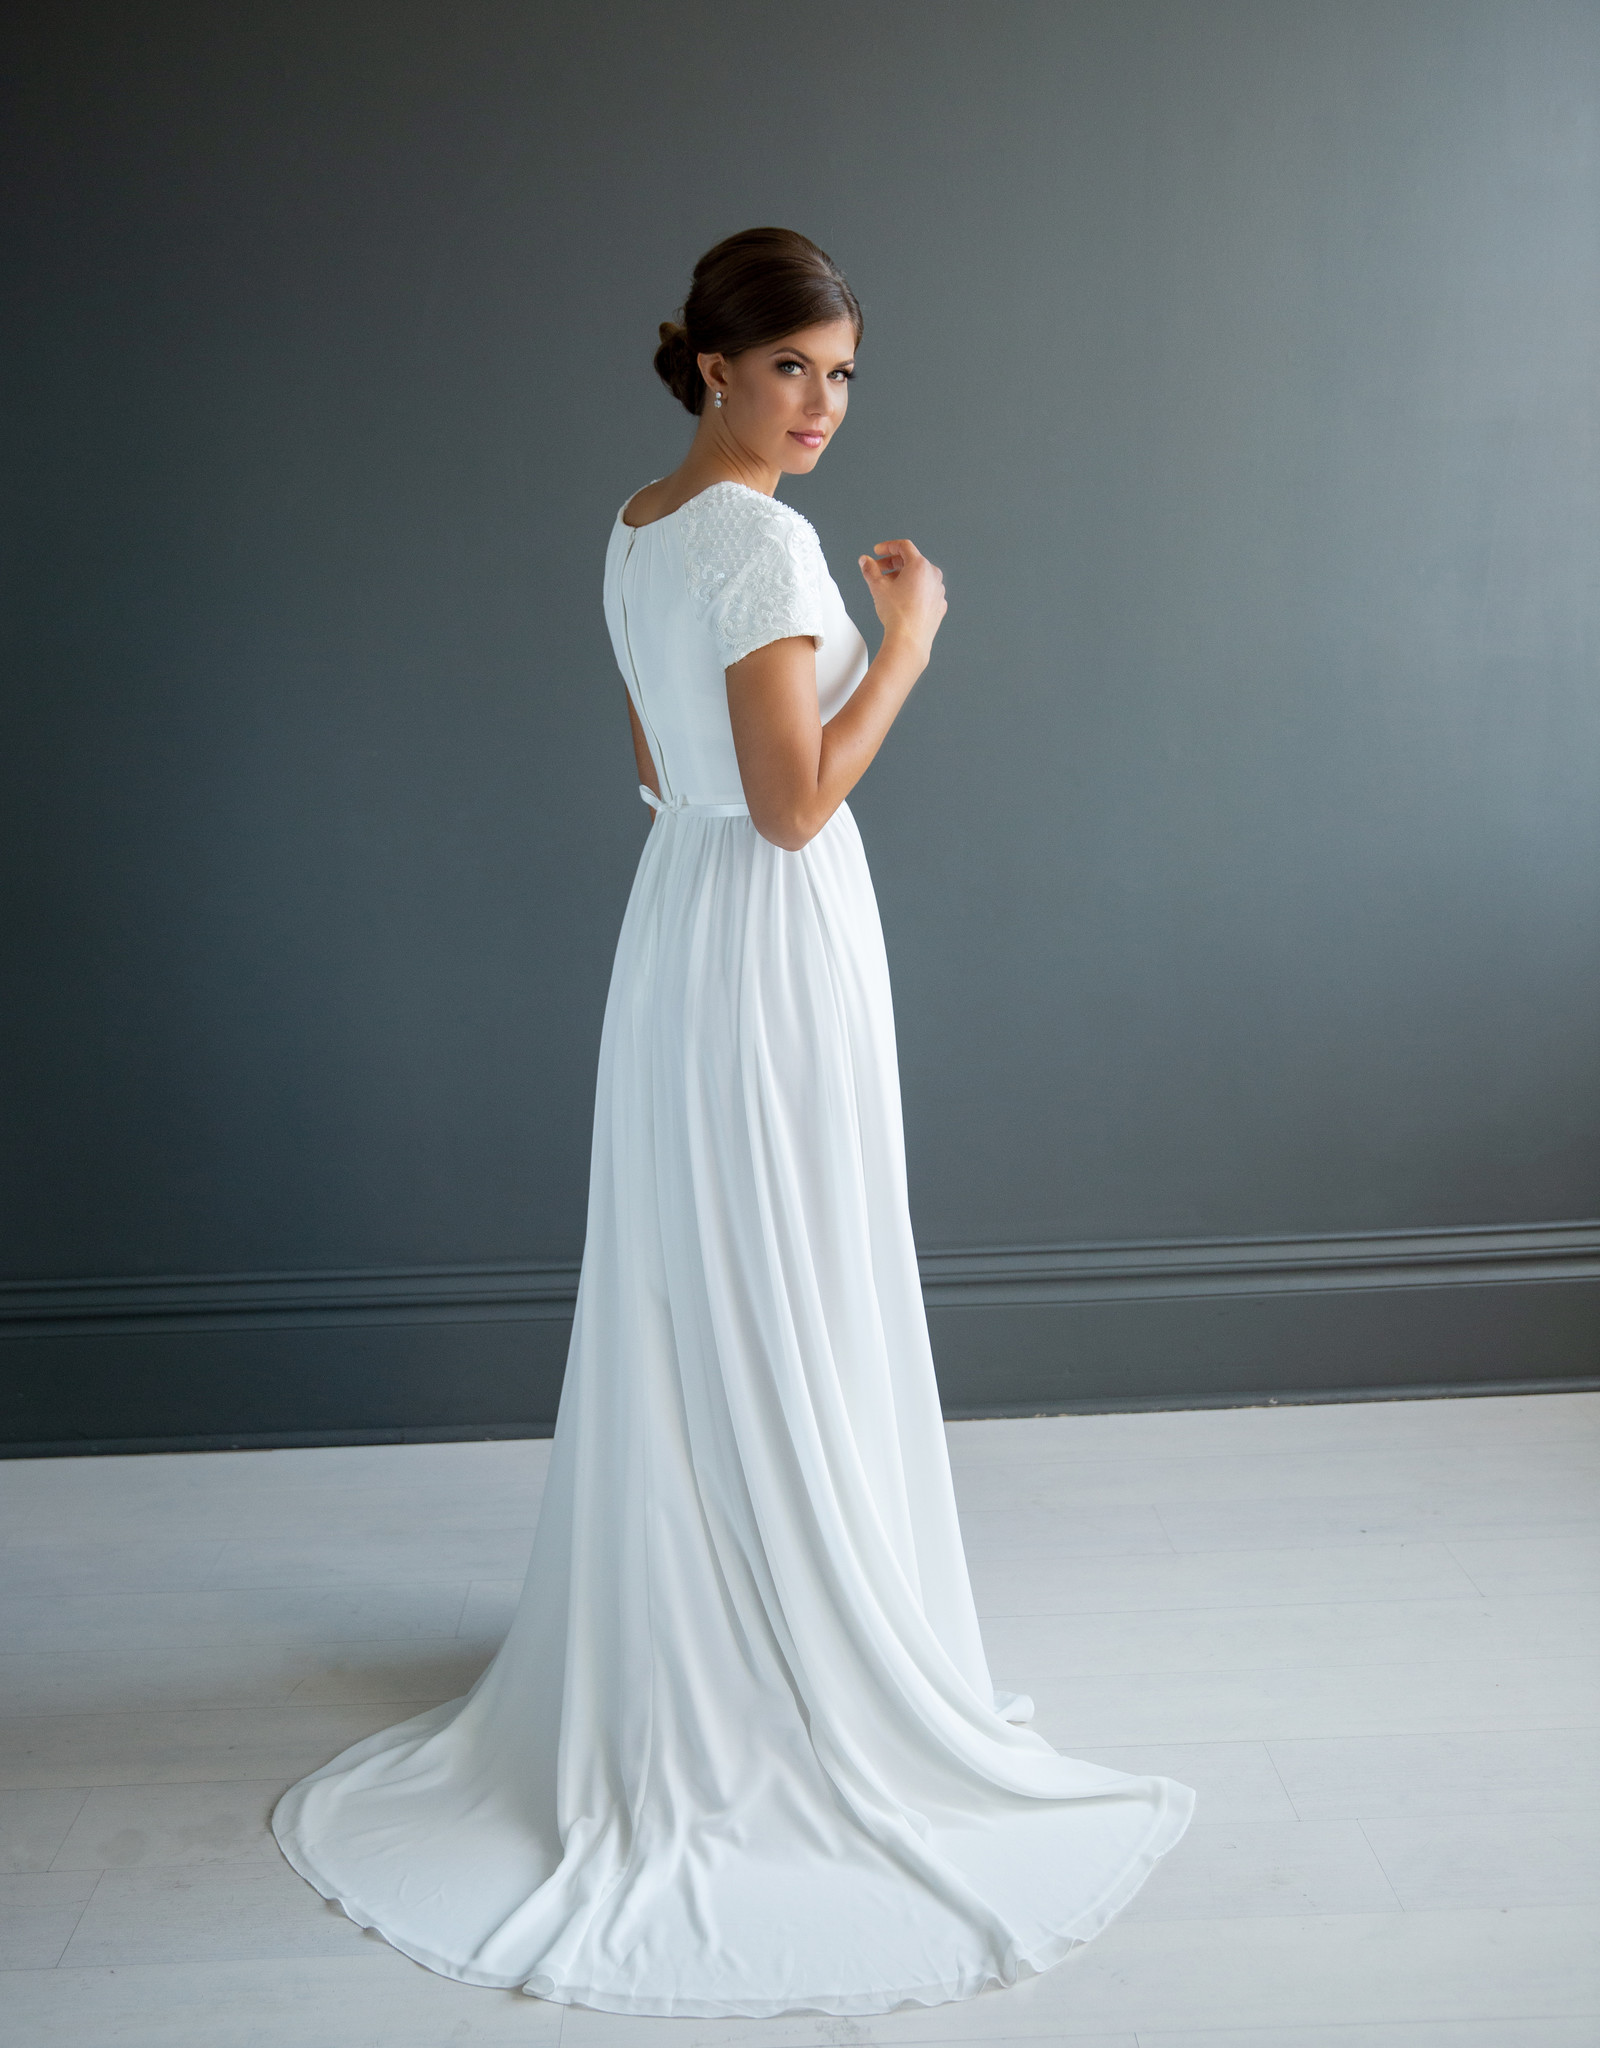 The Modest Bridal Collection Eve